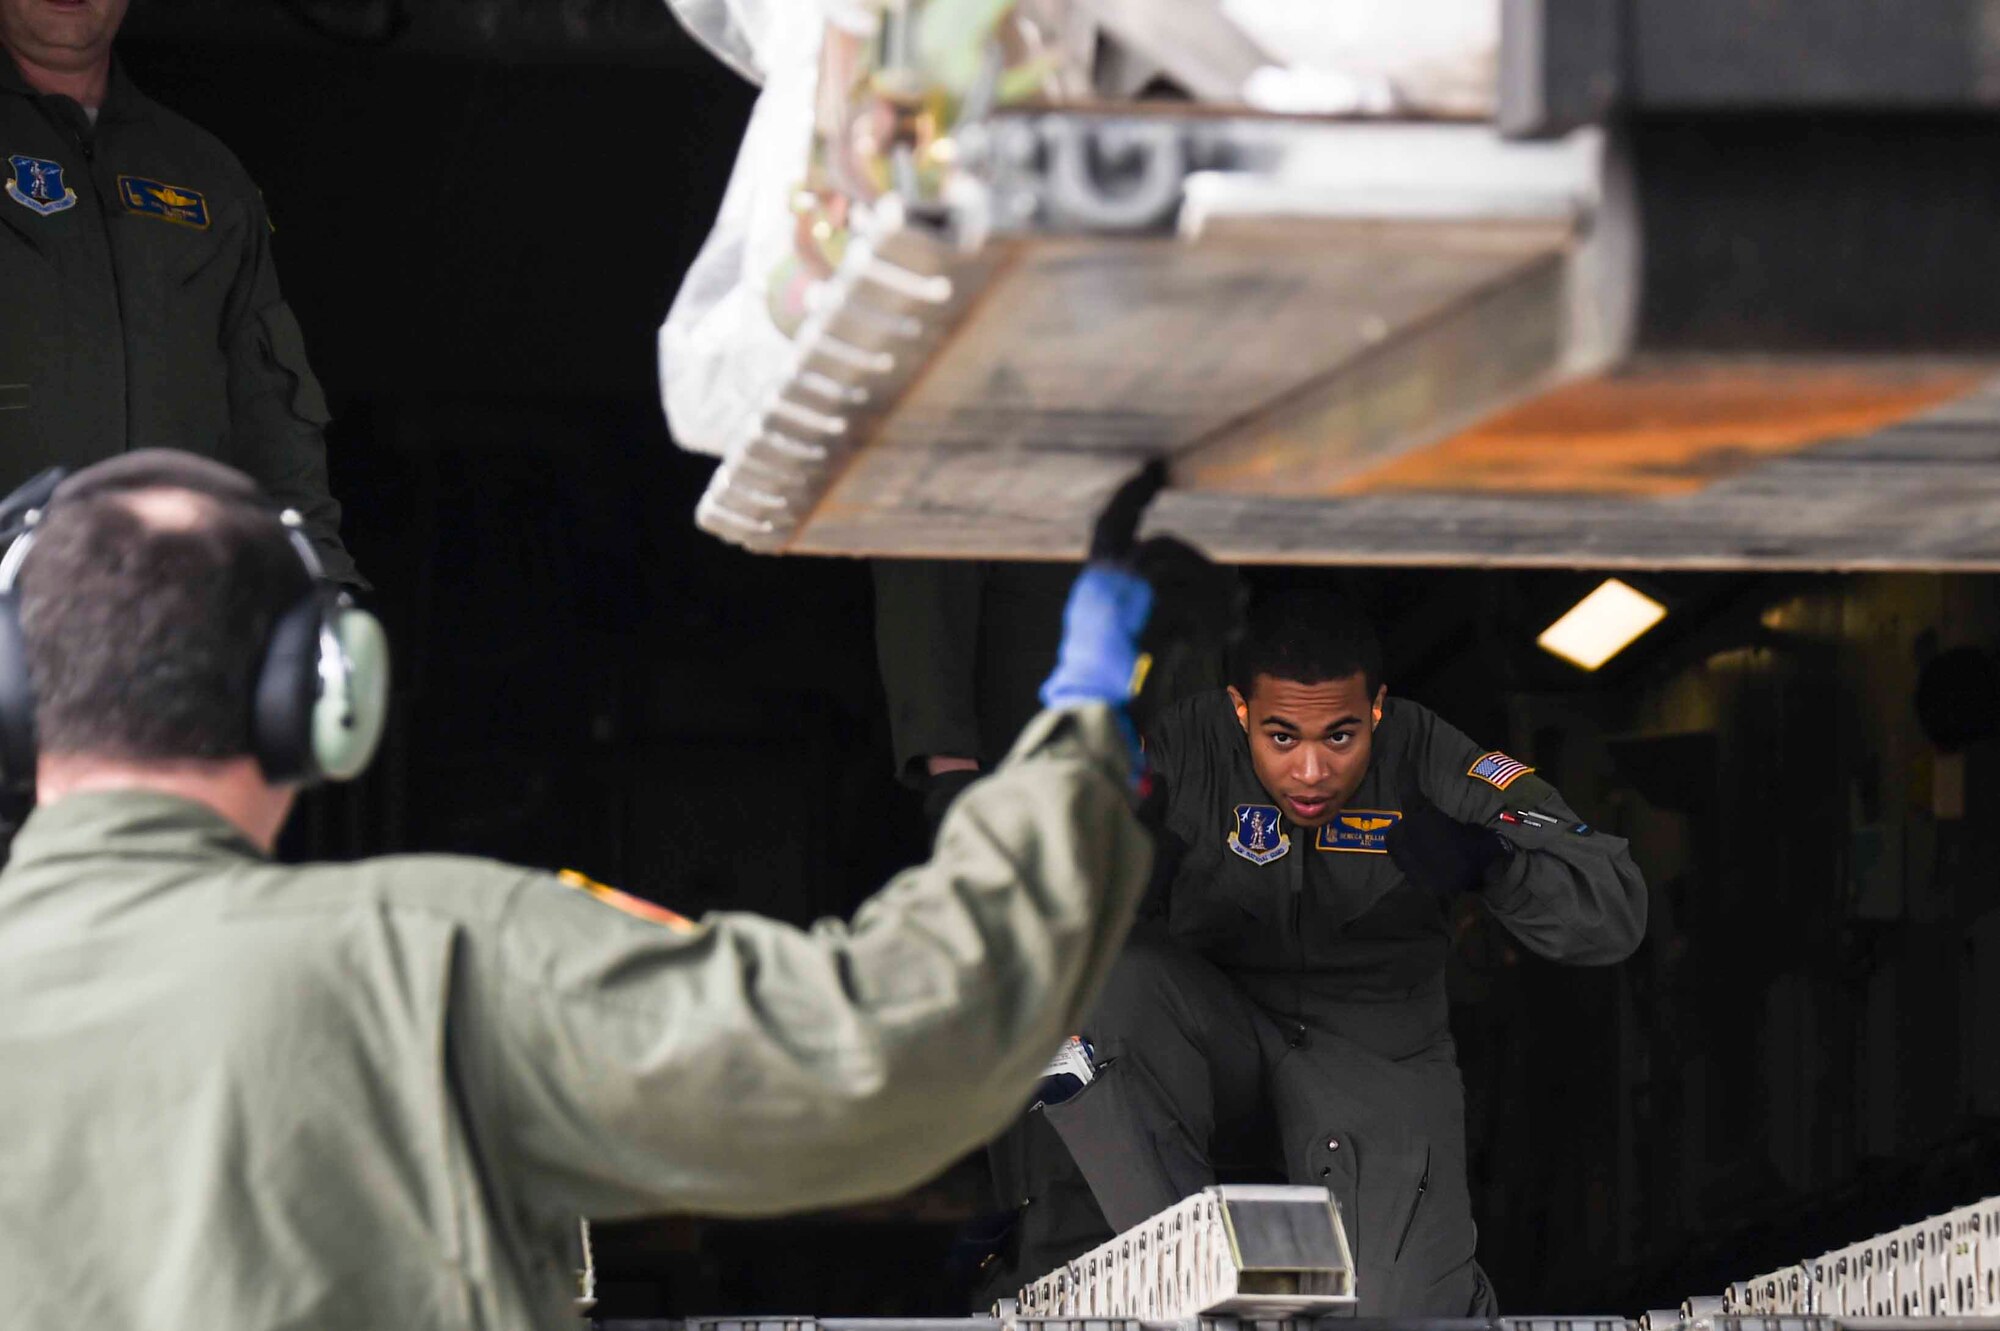 U.S. Air Force Airman 1st Class Seneca Williams, a New York Air National Guard 105th Airlift Wing load master, helps position a pallet to load onto a C-17 Globemaster III at the Fresno Air National Guard Base, Jan. 21, 2016, in support of the 144th Fighter Wing’s participation in Red Flag 16-01. Red Flag is a realistic combat training exercise, which is hosted by Nellis Air Force Base, Nevada and the U.S. Air Force Warfare Center. The 105th AW airlifted 12 pallets and 29 personnel assigned to the 144th FW. (U.S. Air National Guard Senior Airman Klynne Pearl Serrano)